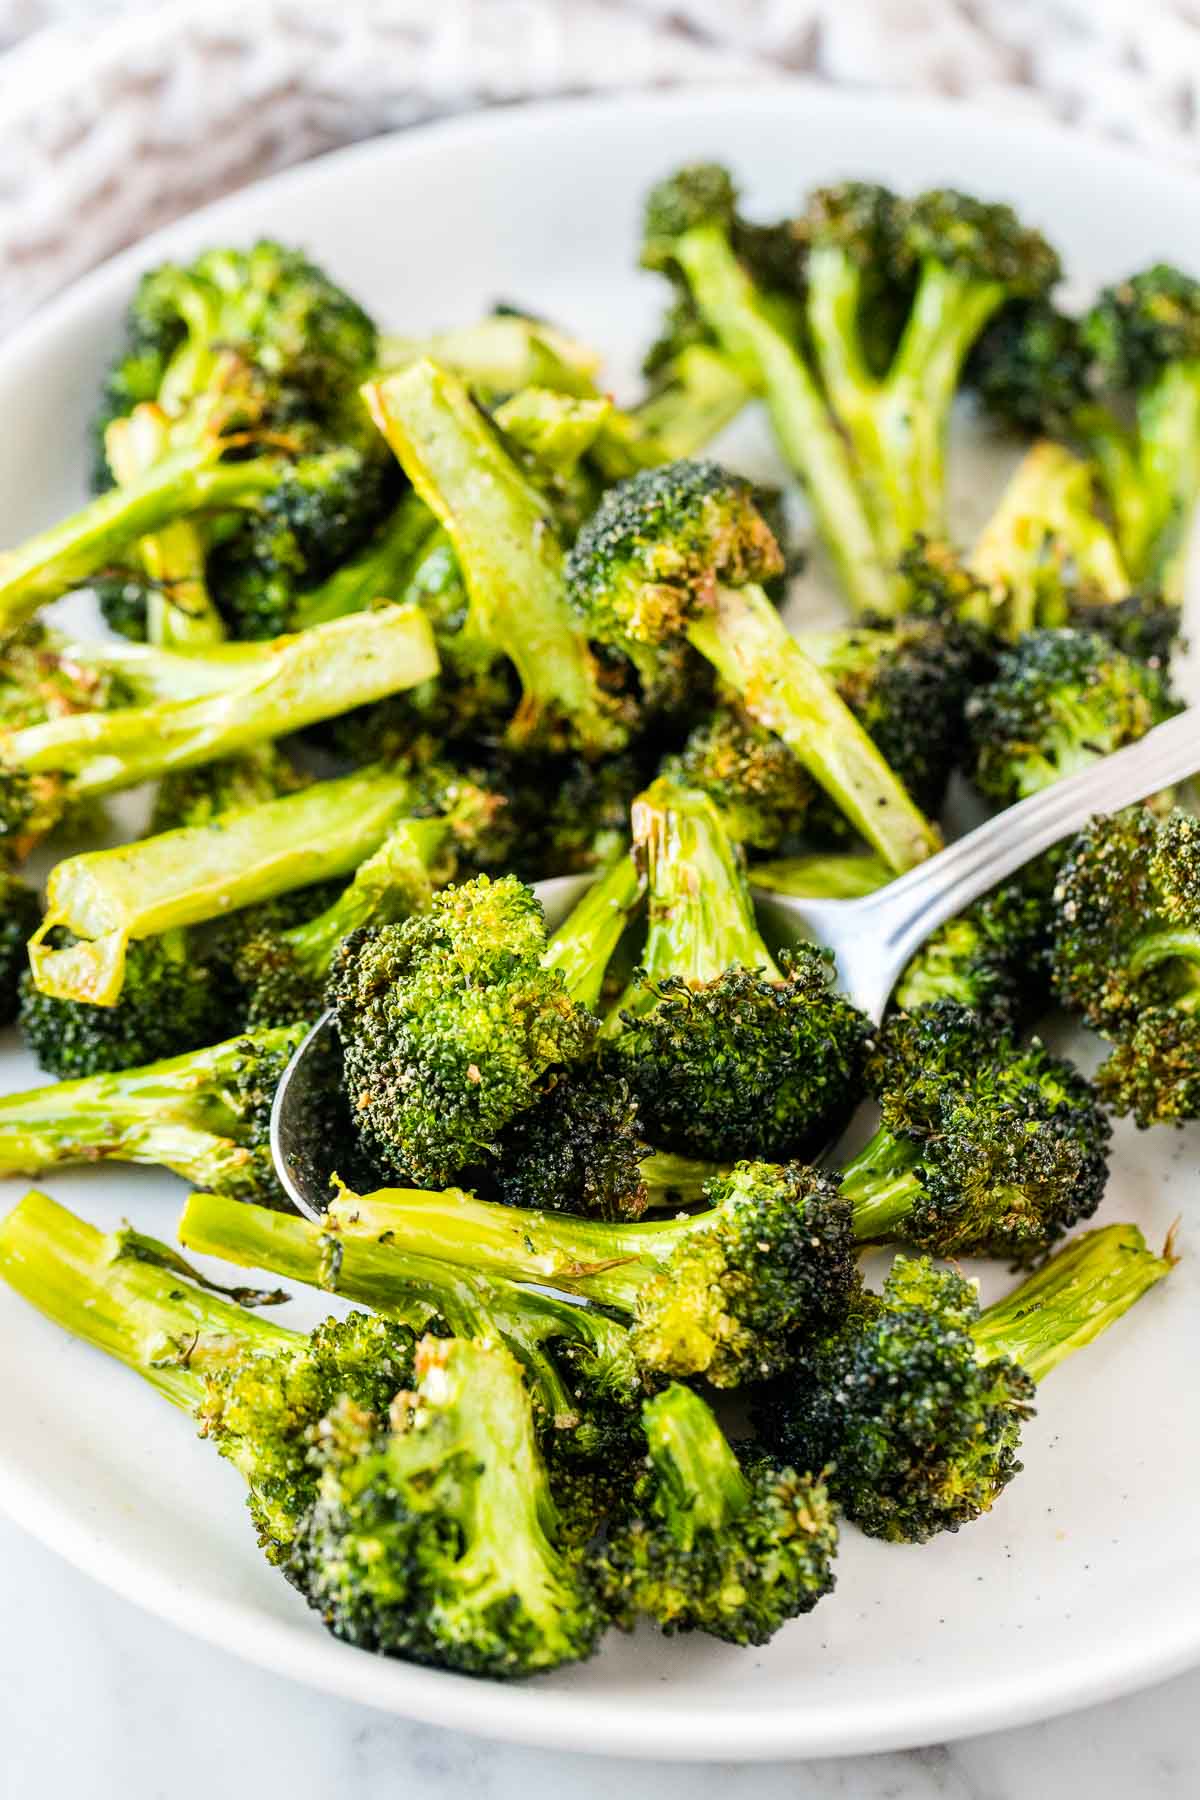 Broccoli florets on a plate with a serving spoon